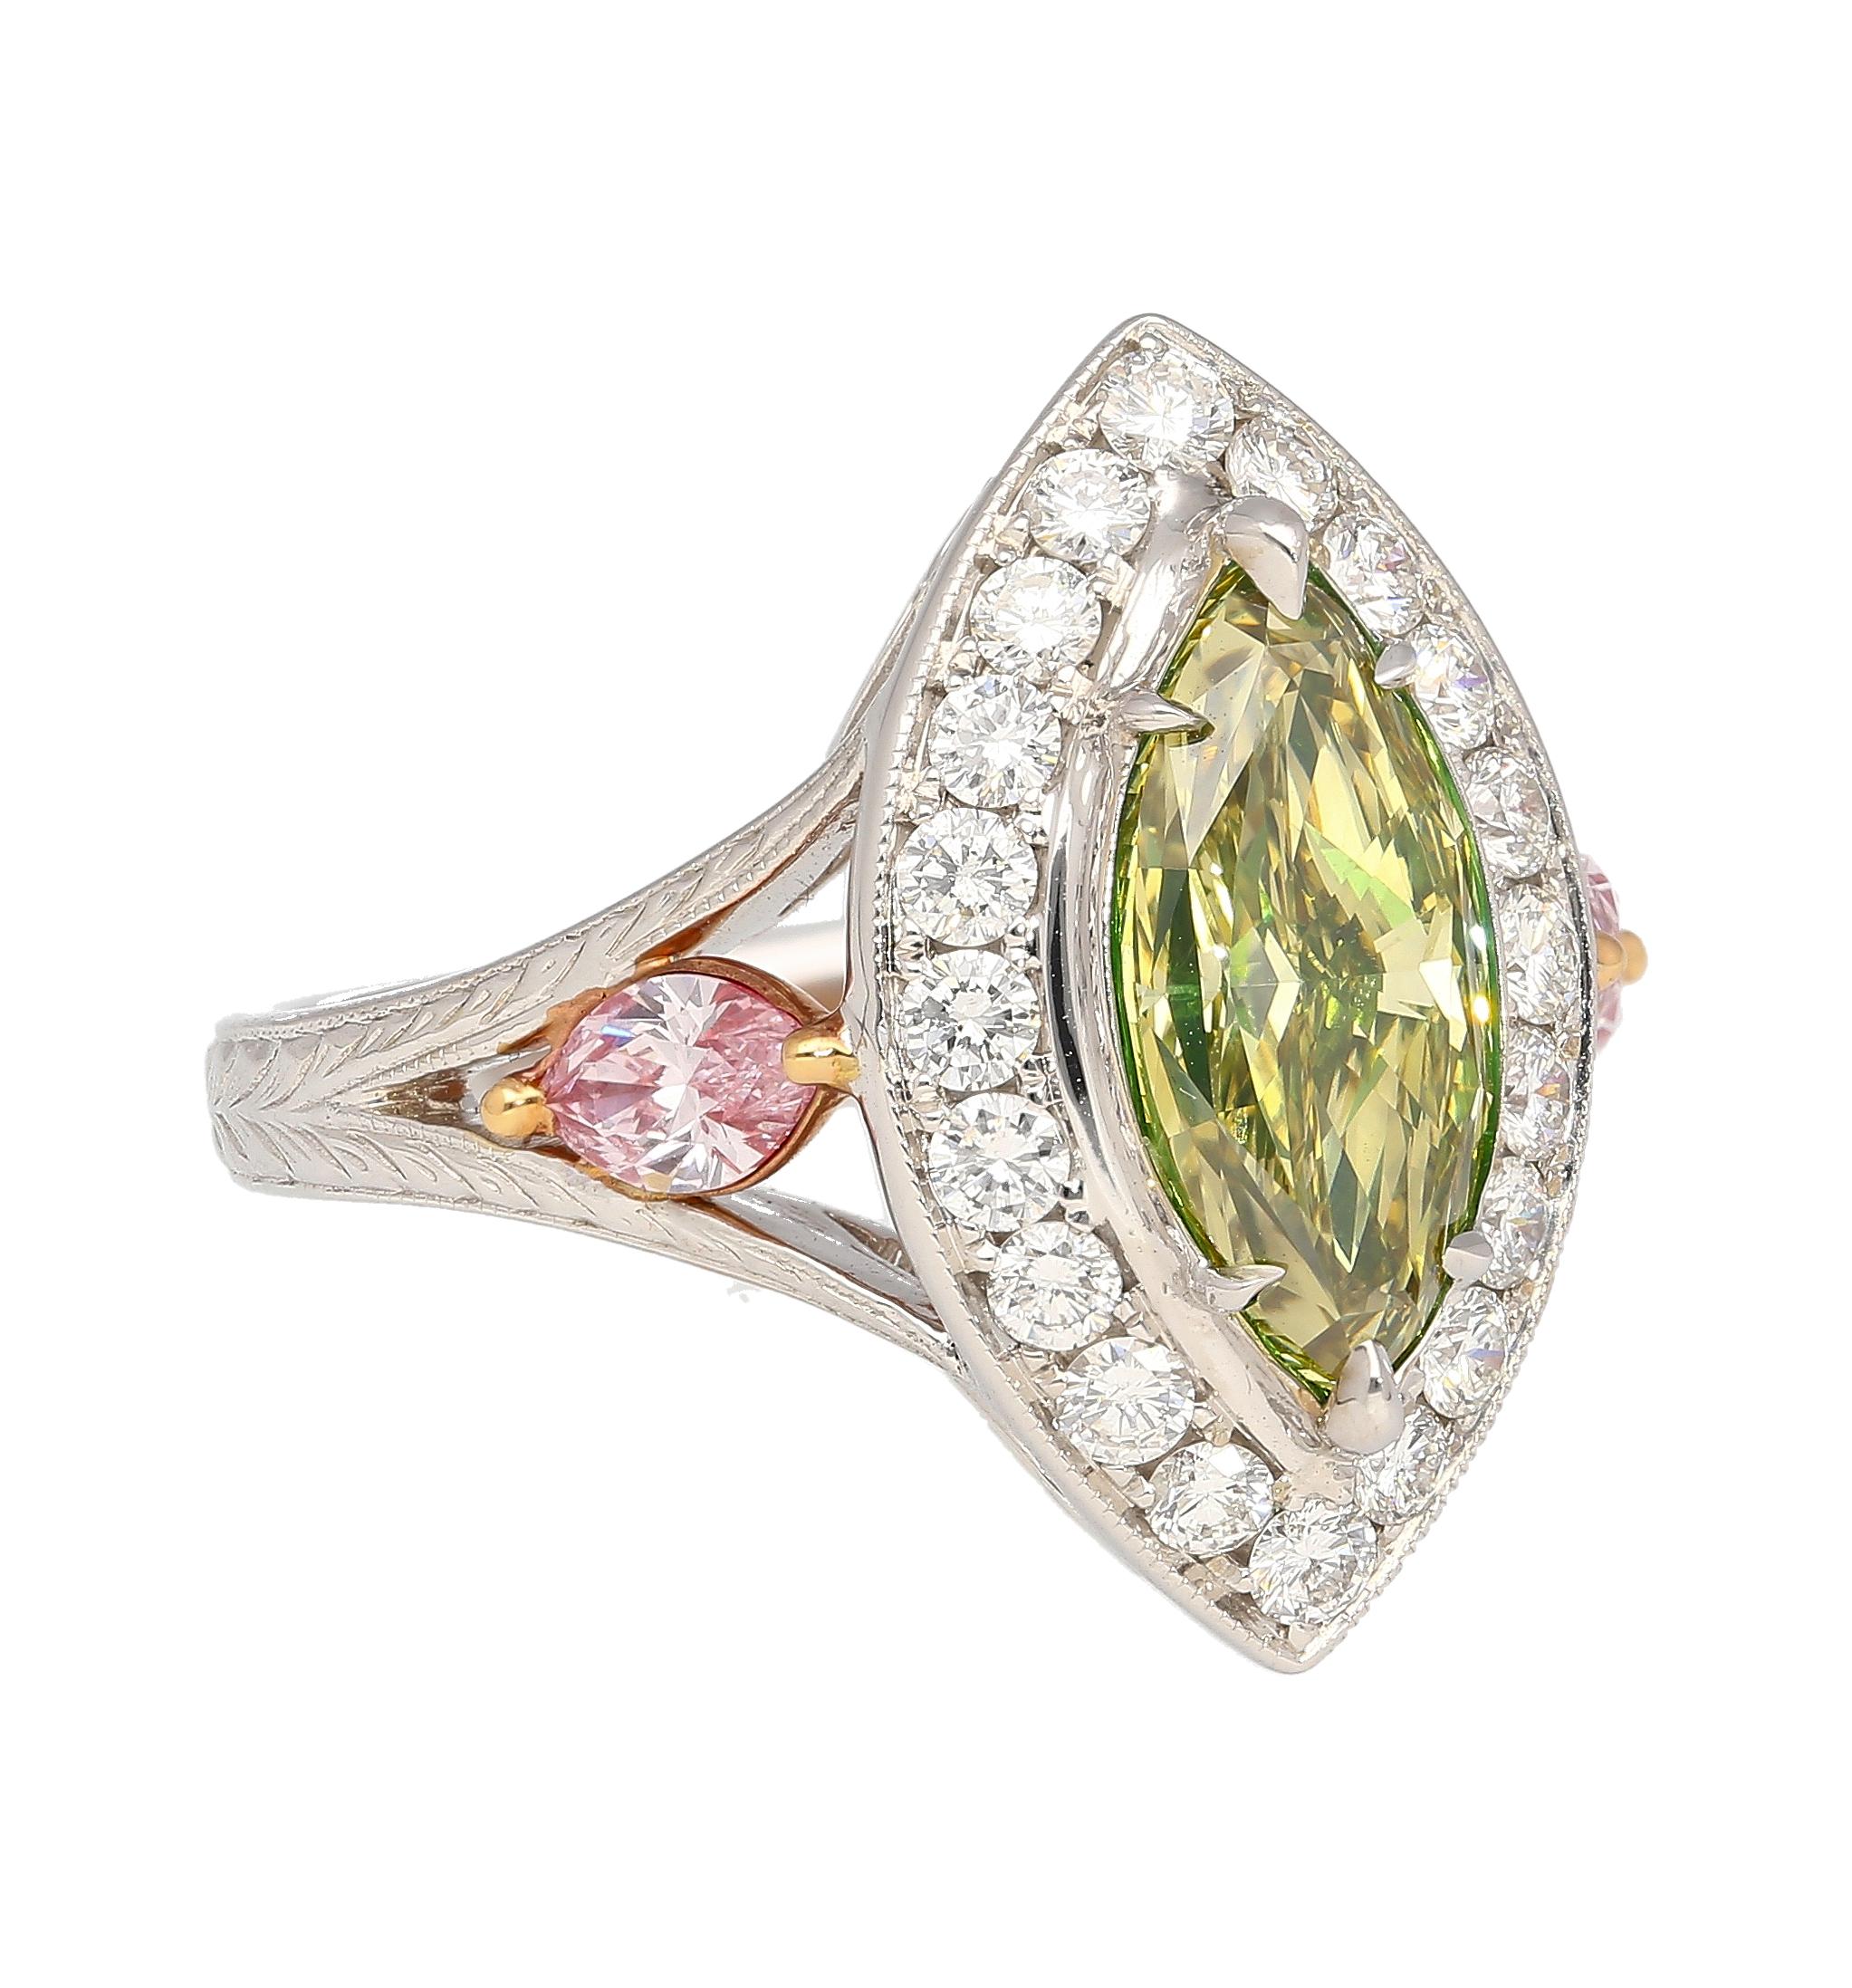 GIA certified 1.92-carat marquise cut Fancy Deep Brownish Greenish Yellow diamond ring. Set with 2 marquise cut pink diamond accents and a round cut white diamond halo. Set in 18k tri-colored gold with meticulous attention to detail. The